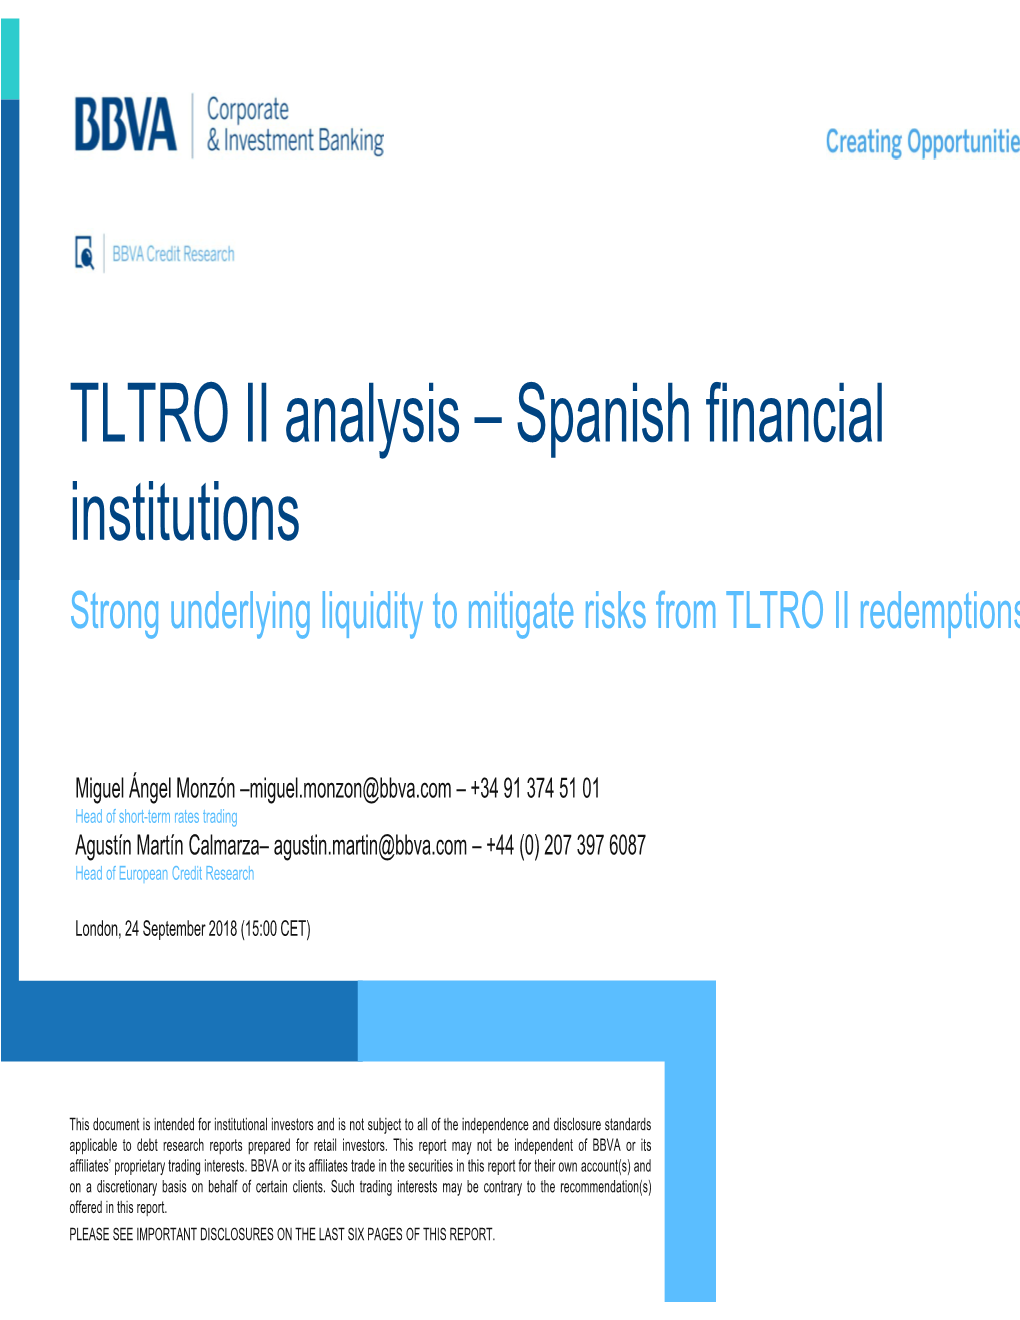 TLTRO II Analysis – Spanish Financial Institutions Strong Underlying Liquidity to Mitigate Risks from TLTRO II Redemptions